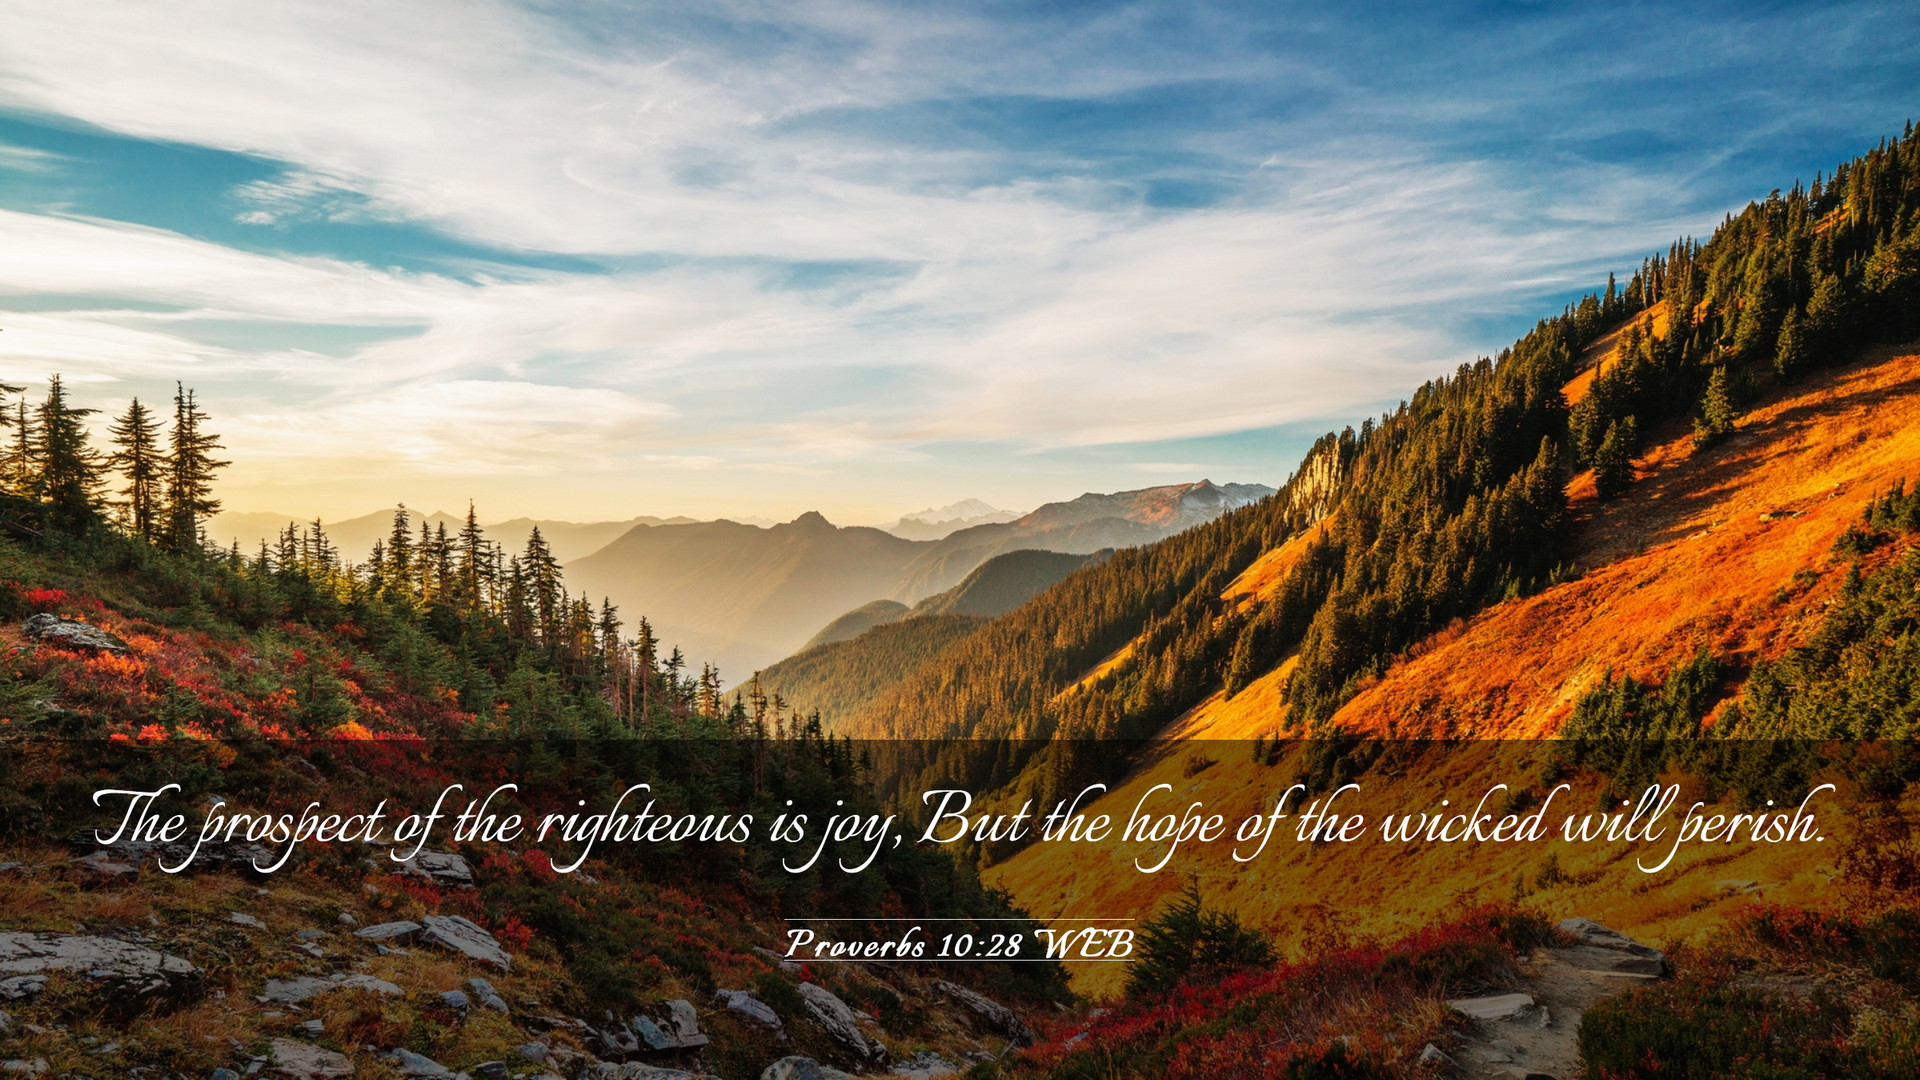 Proverbs 10:28 WEB Desktop Wallpaper prospect of the righteous is joy, But the